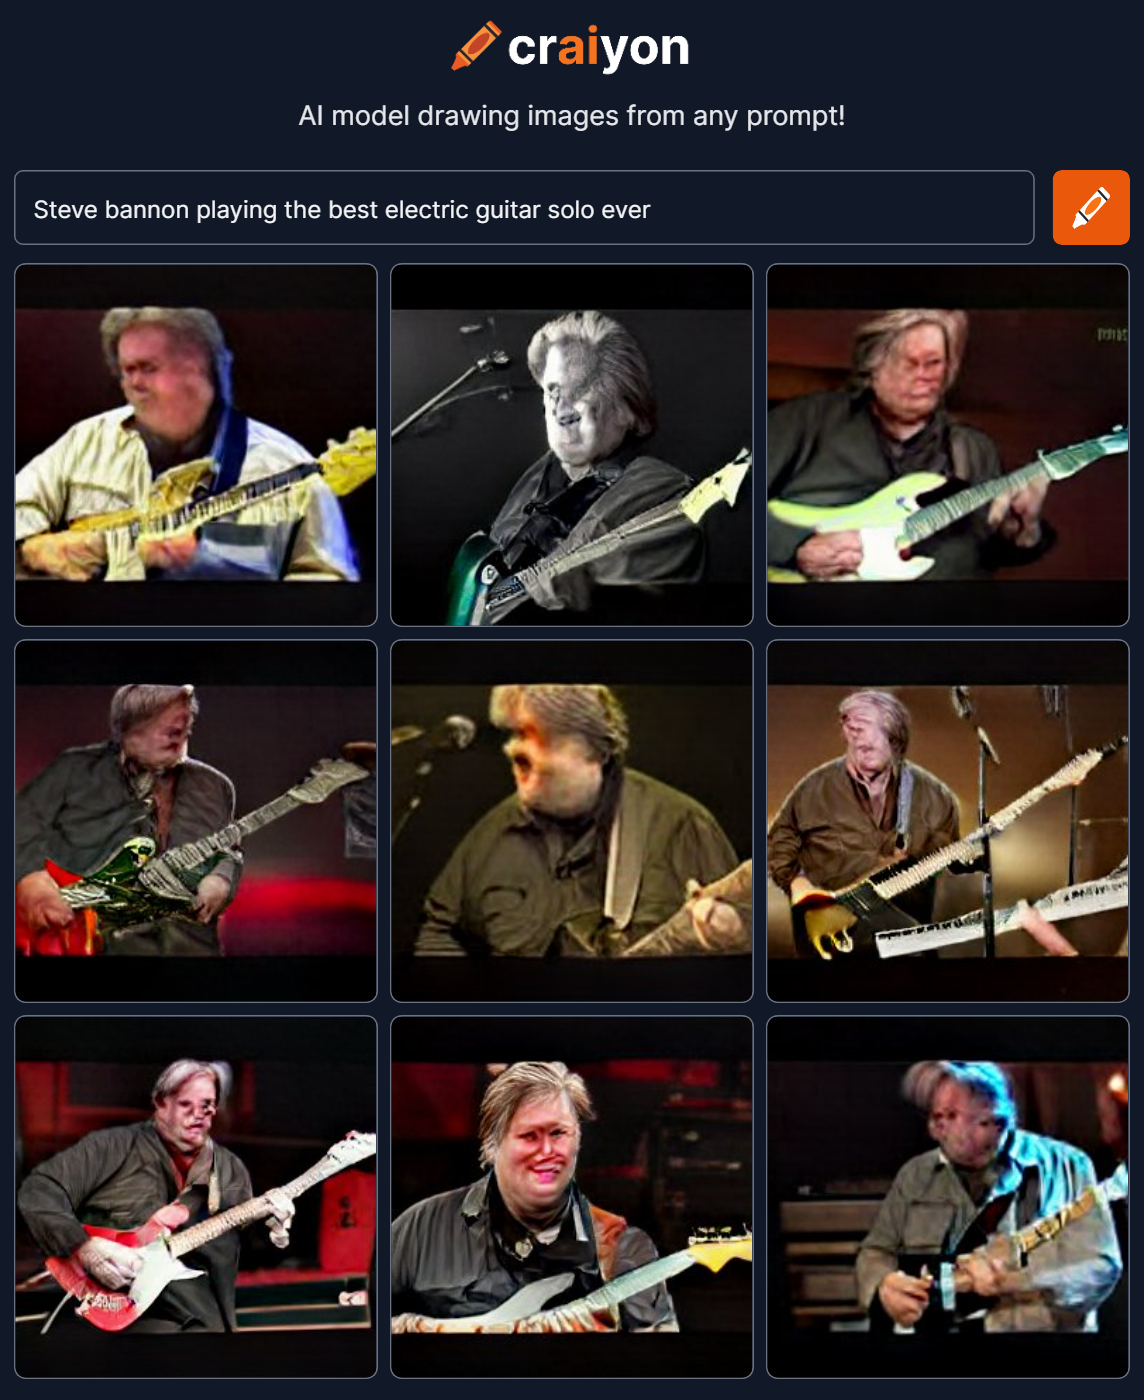 craiyon_170905_Steve_bannon_playing_the_best_electric_guitar_solo_ever.png